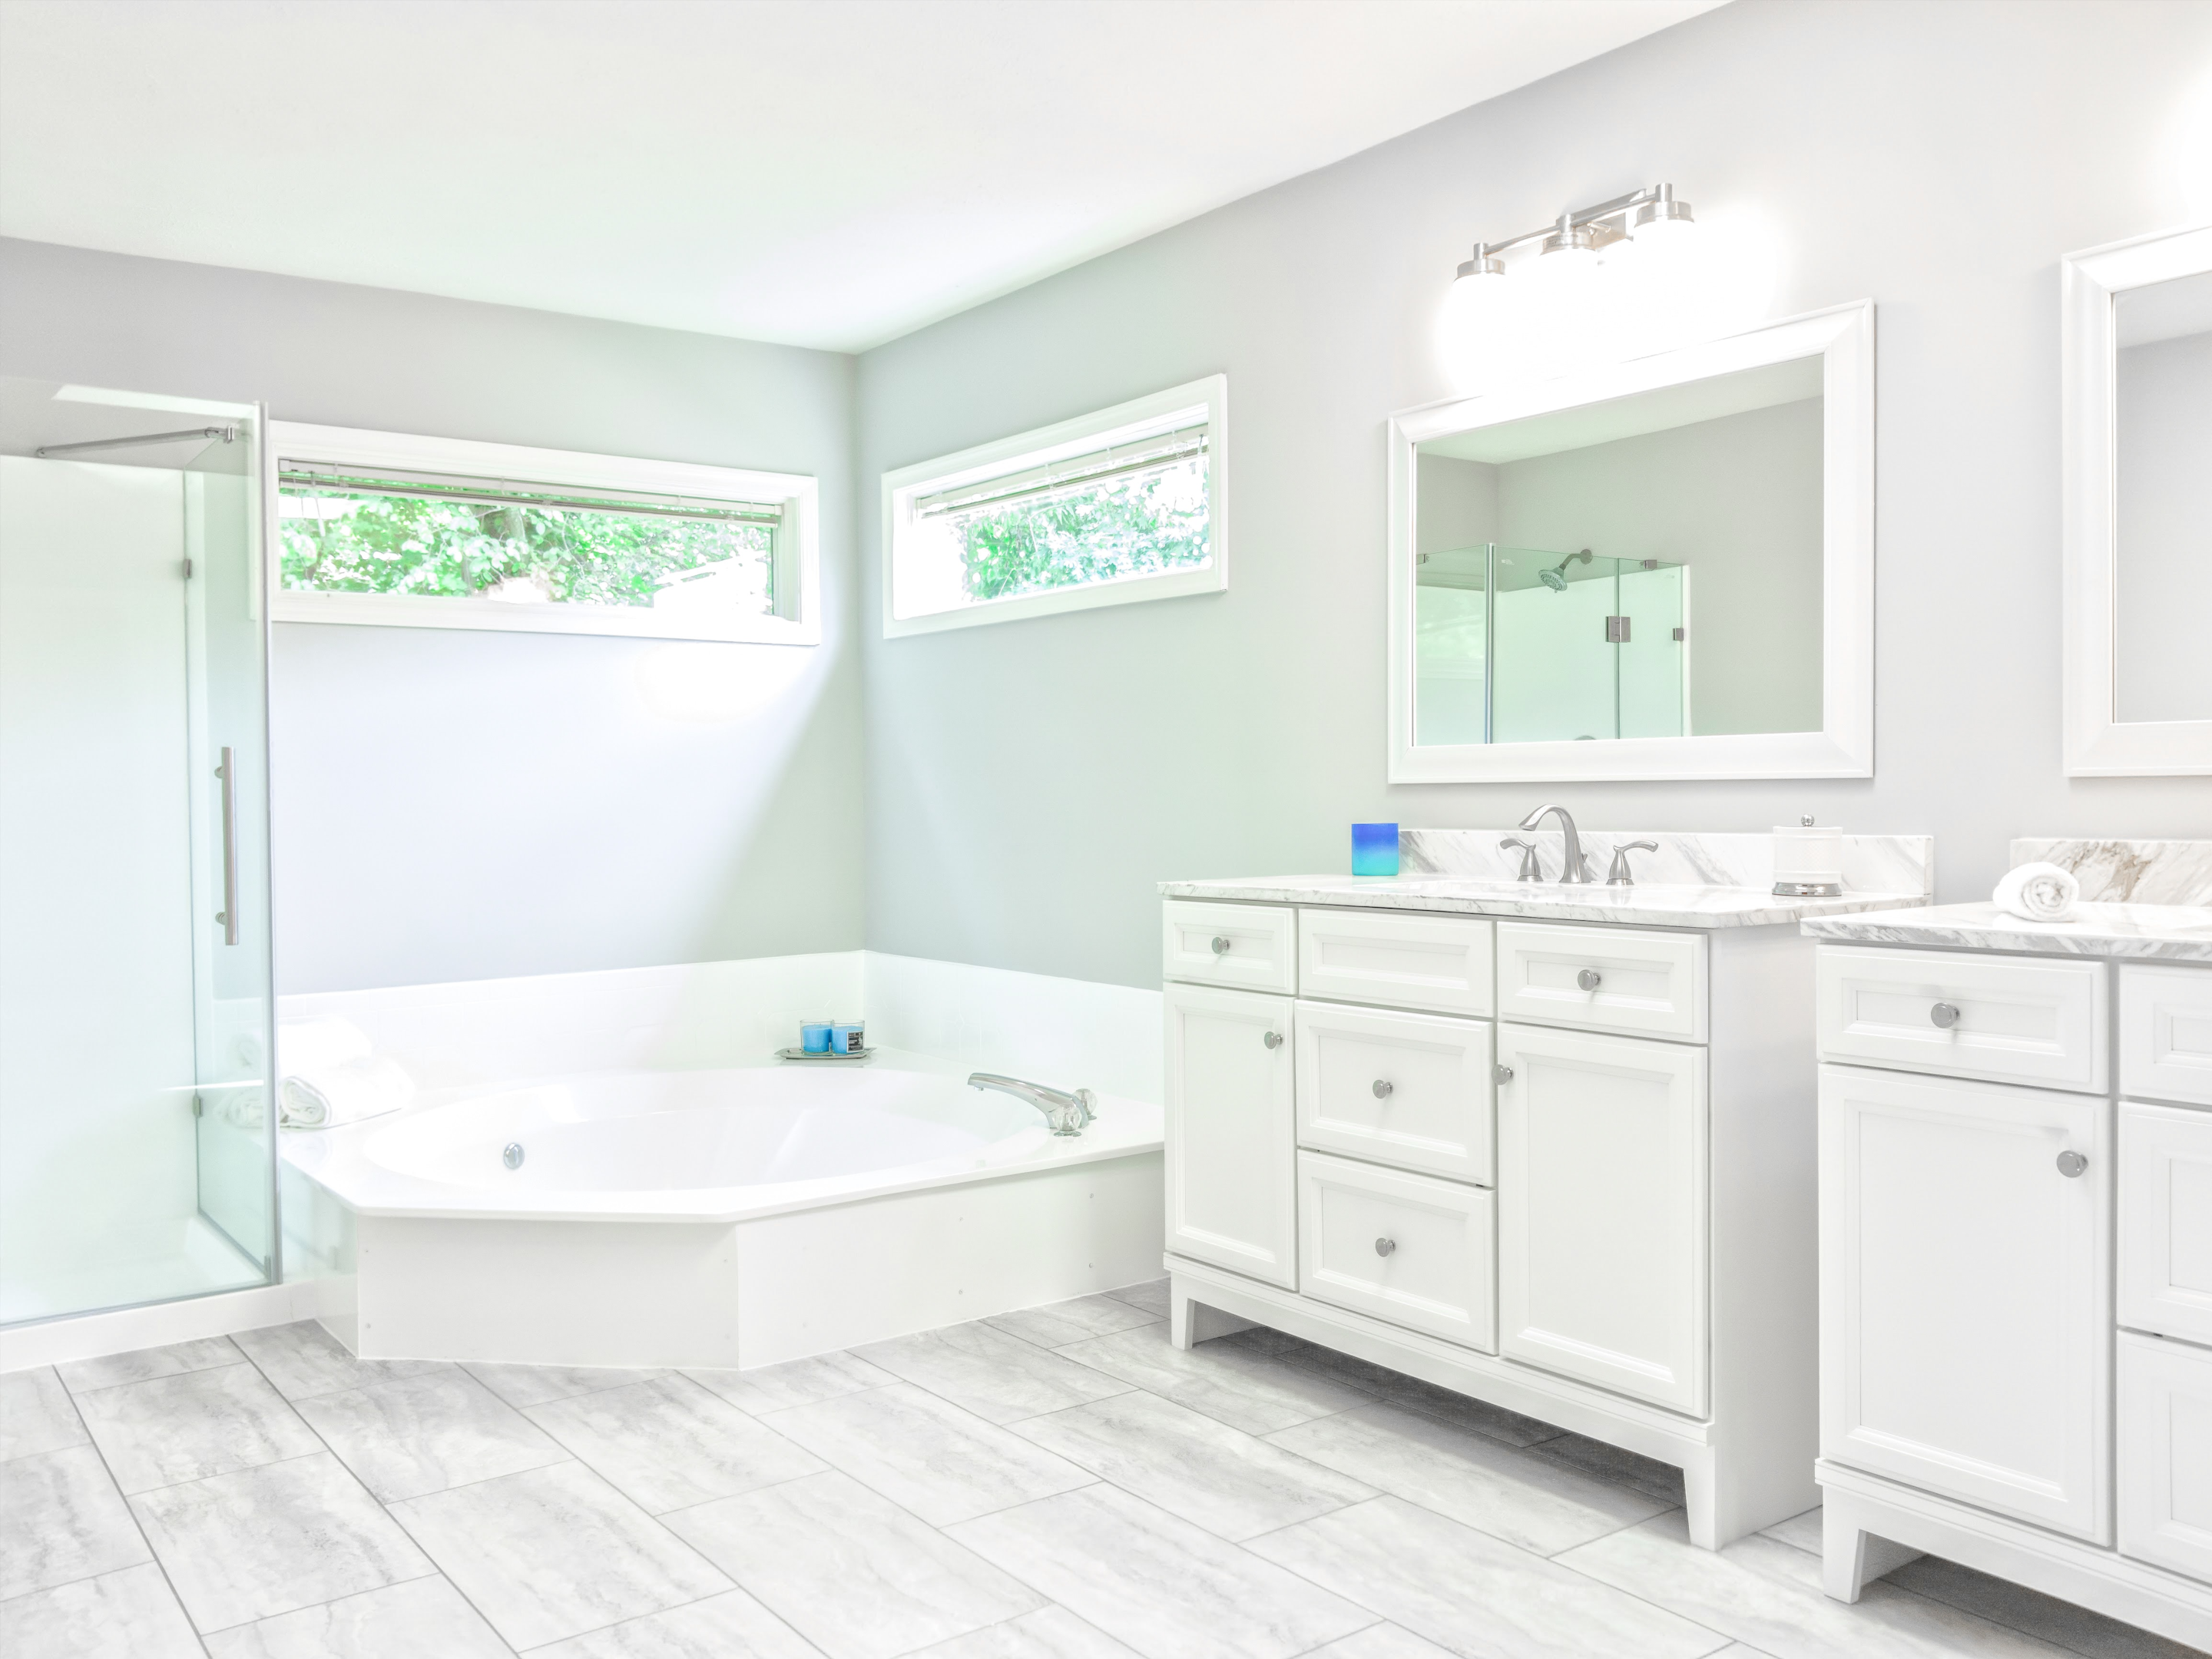 Cost For a One-Day Bathroom Makeover